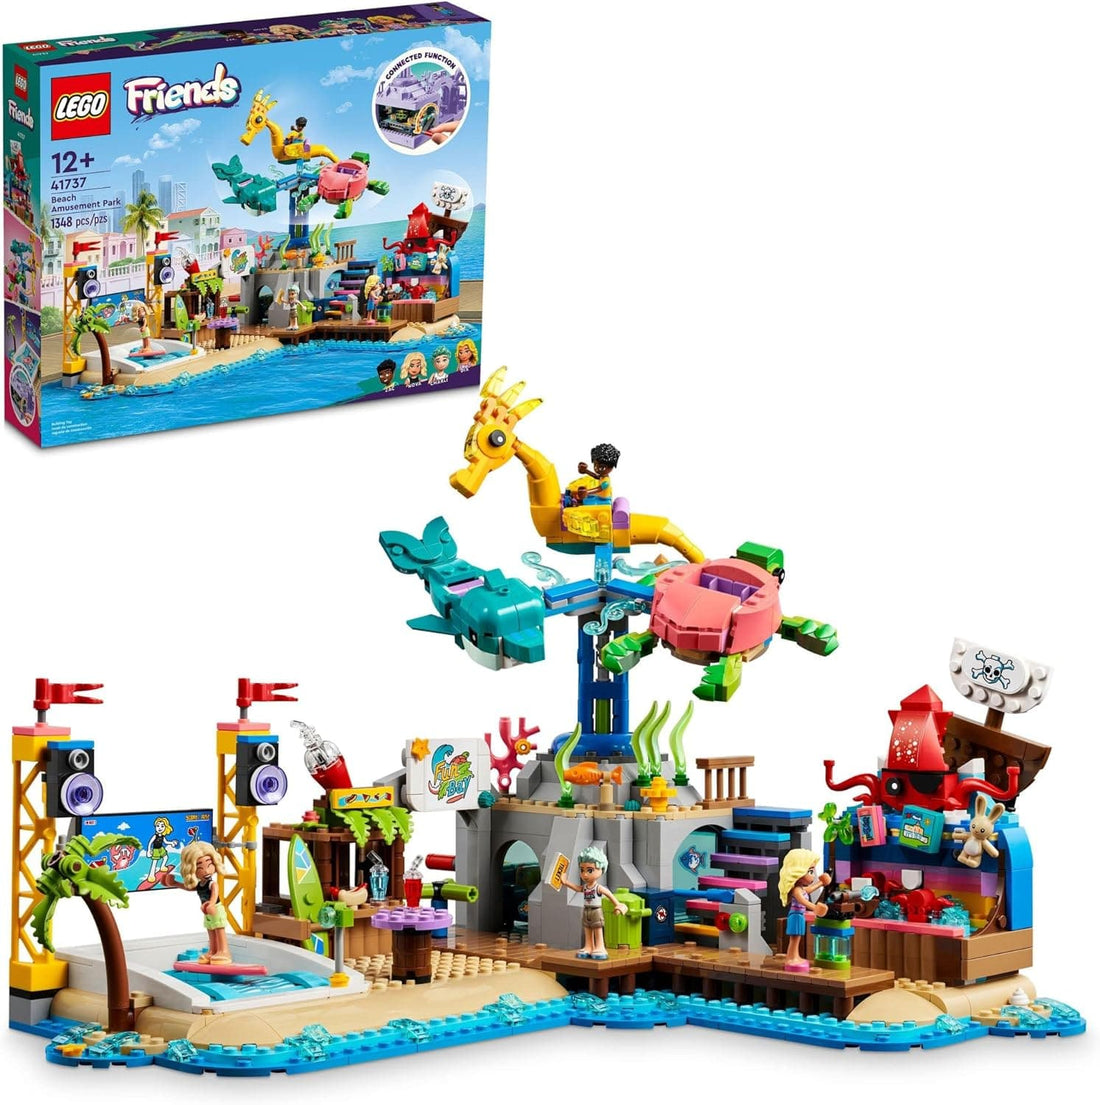 LEGO Friends Beach Amusement Park with Spinning Carousel, Wave Machine and Shooting Gallery Game - best price from Maltashopper.com 41737